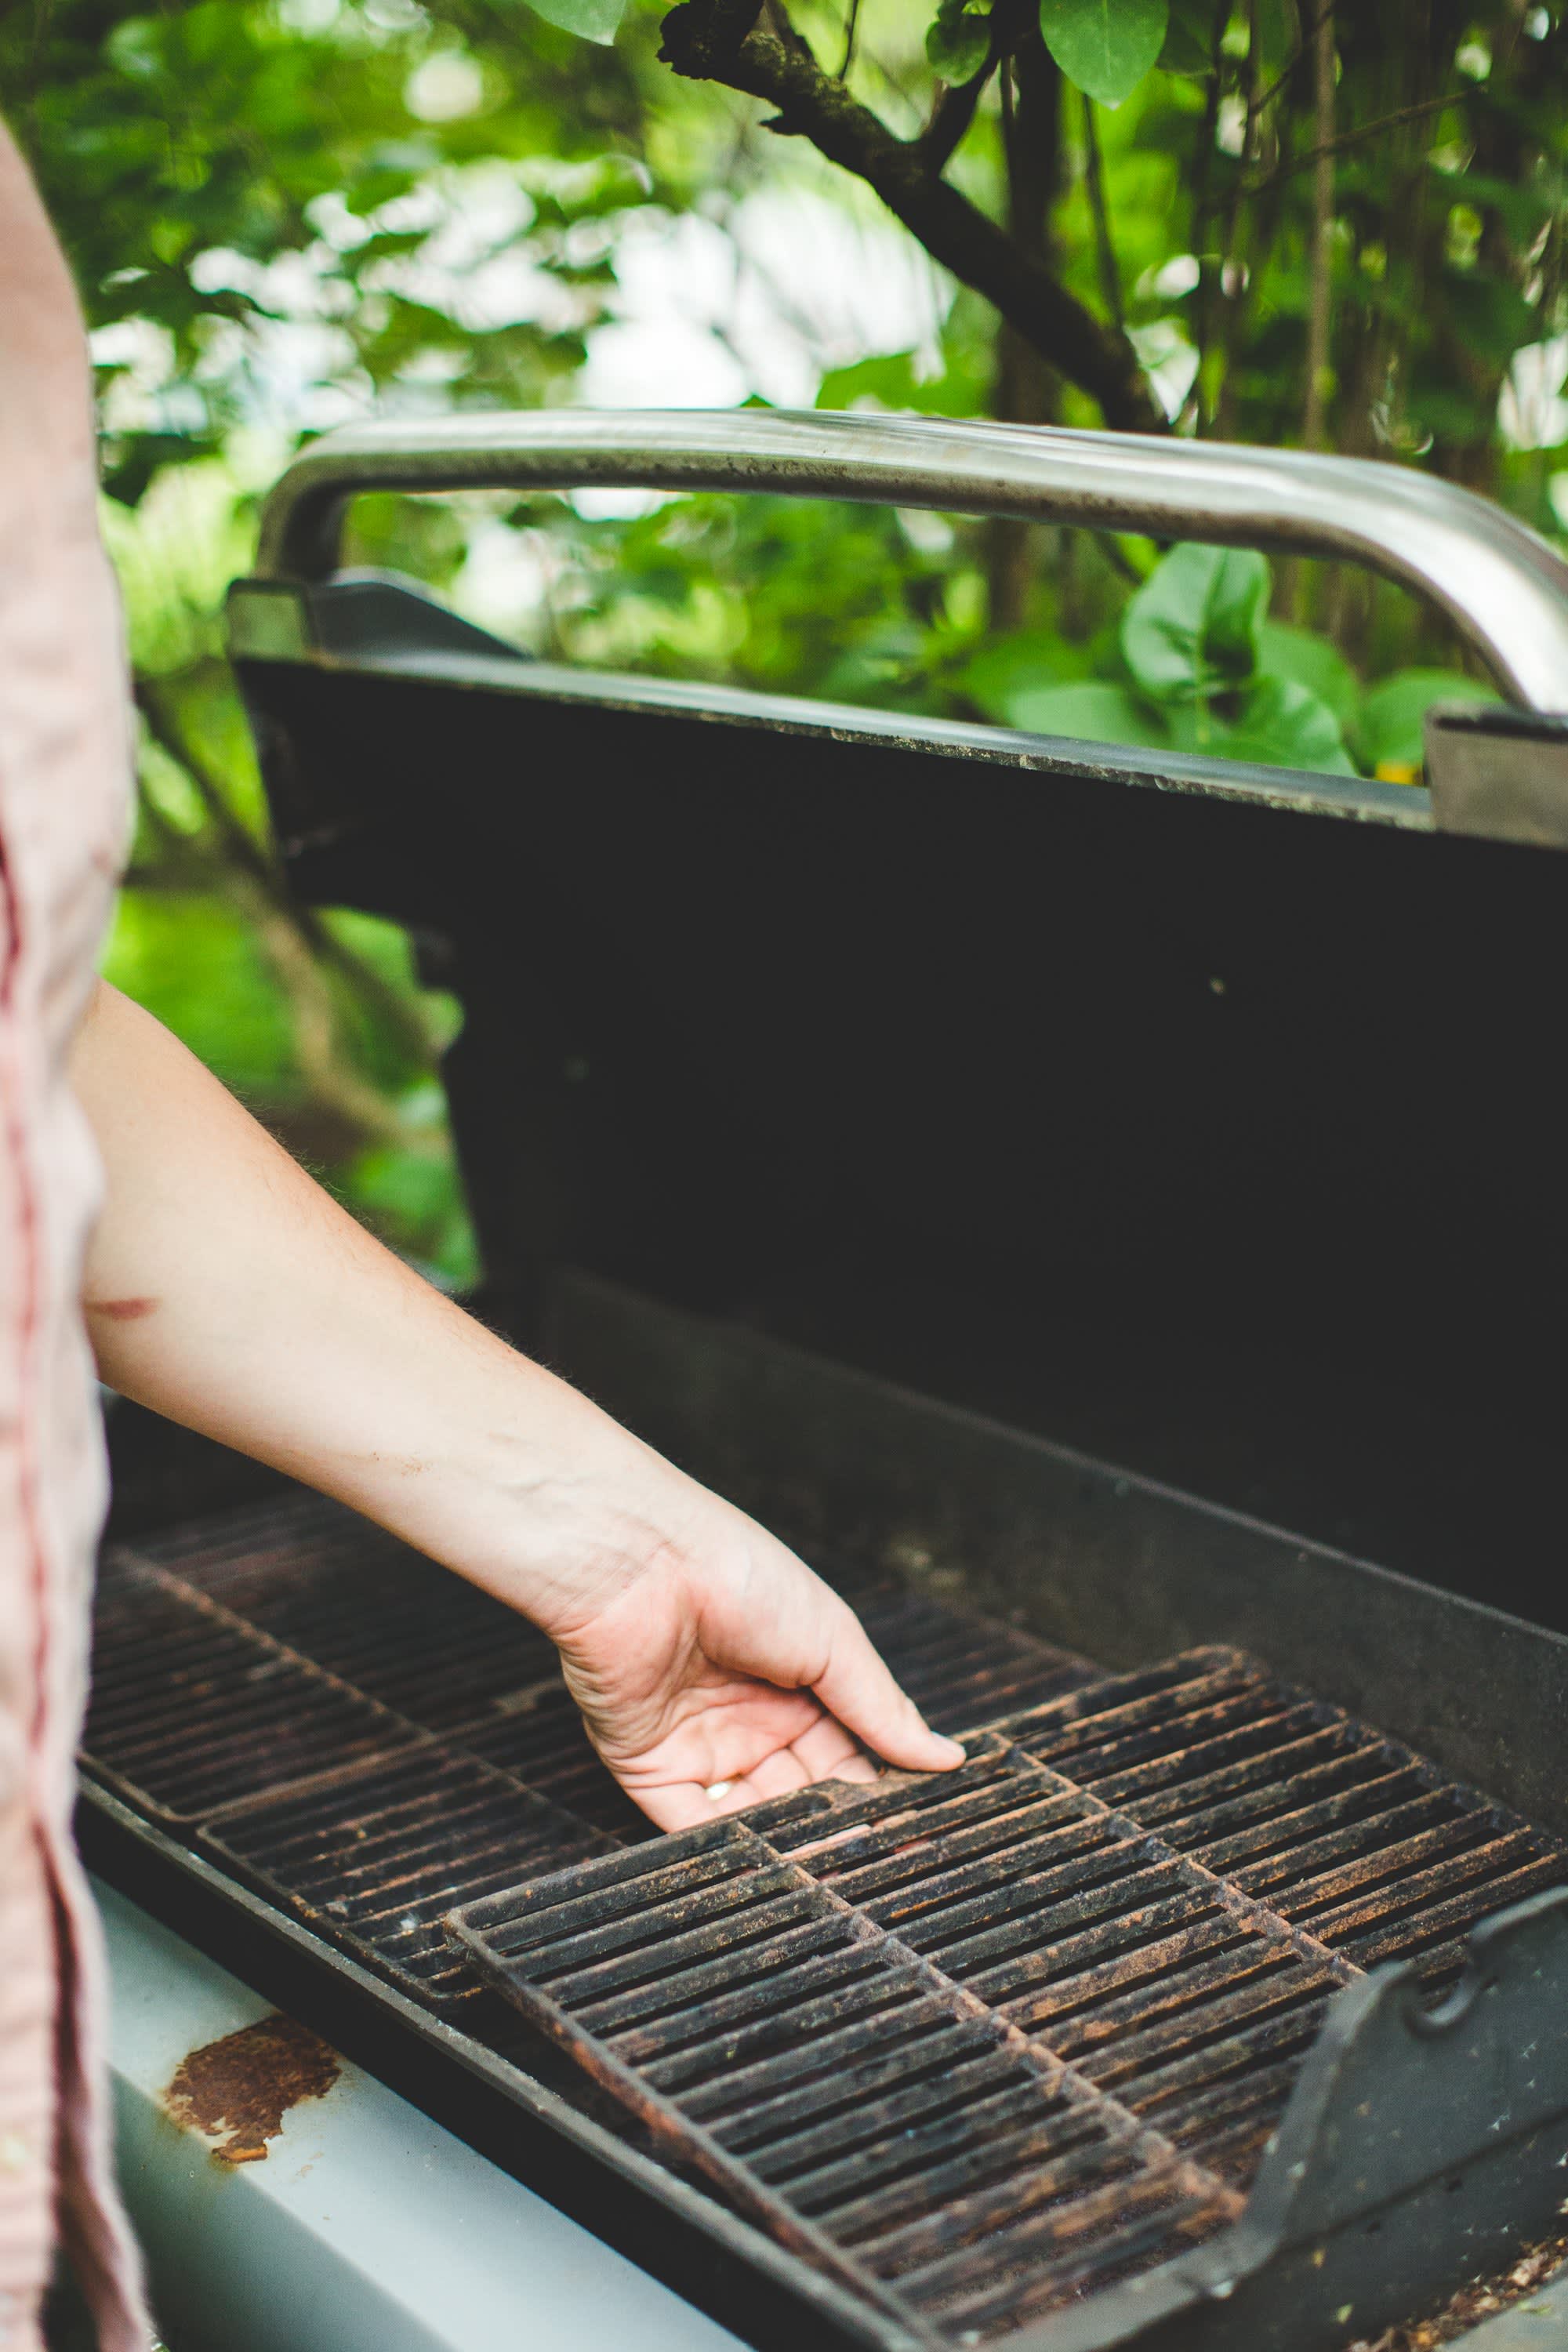 How To Clean Grill Outside How To Clean a Gas Grill, Start to Finish | Kitchn